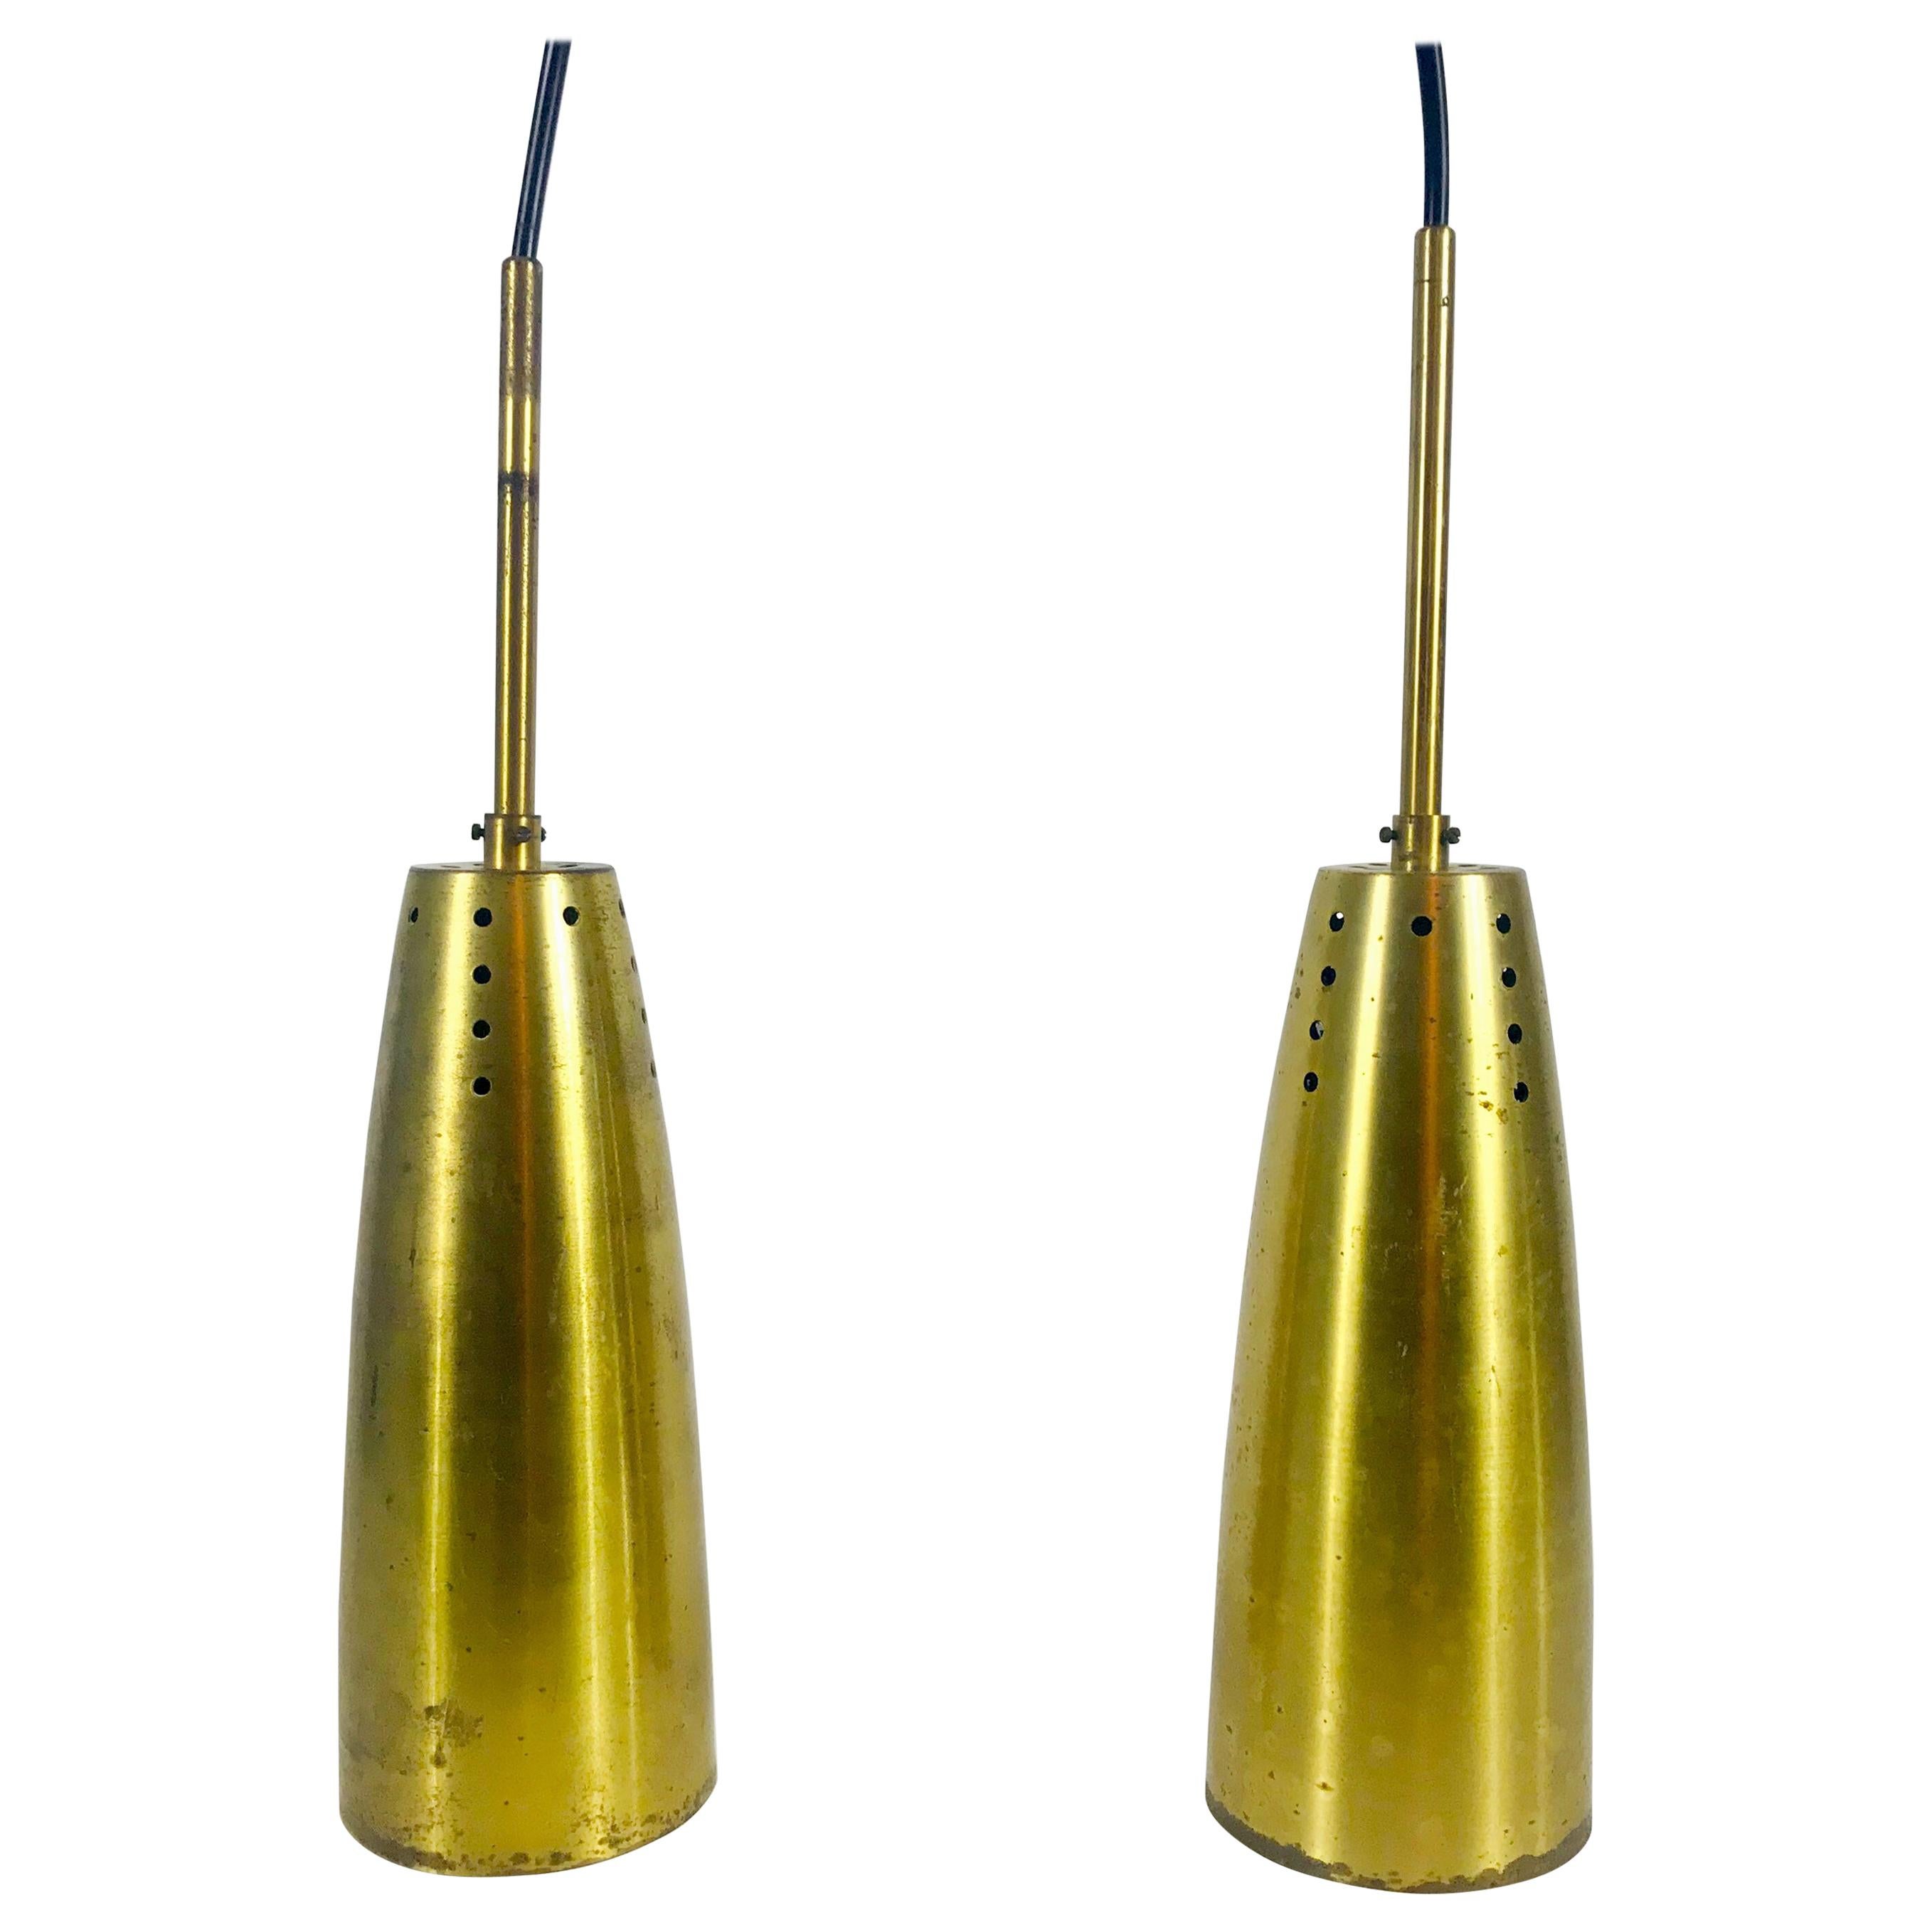 Pair of Full Brass Mid-Century Modern Pendant Lamps, 1950s, Germany For Sale